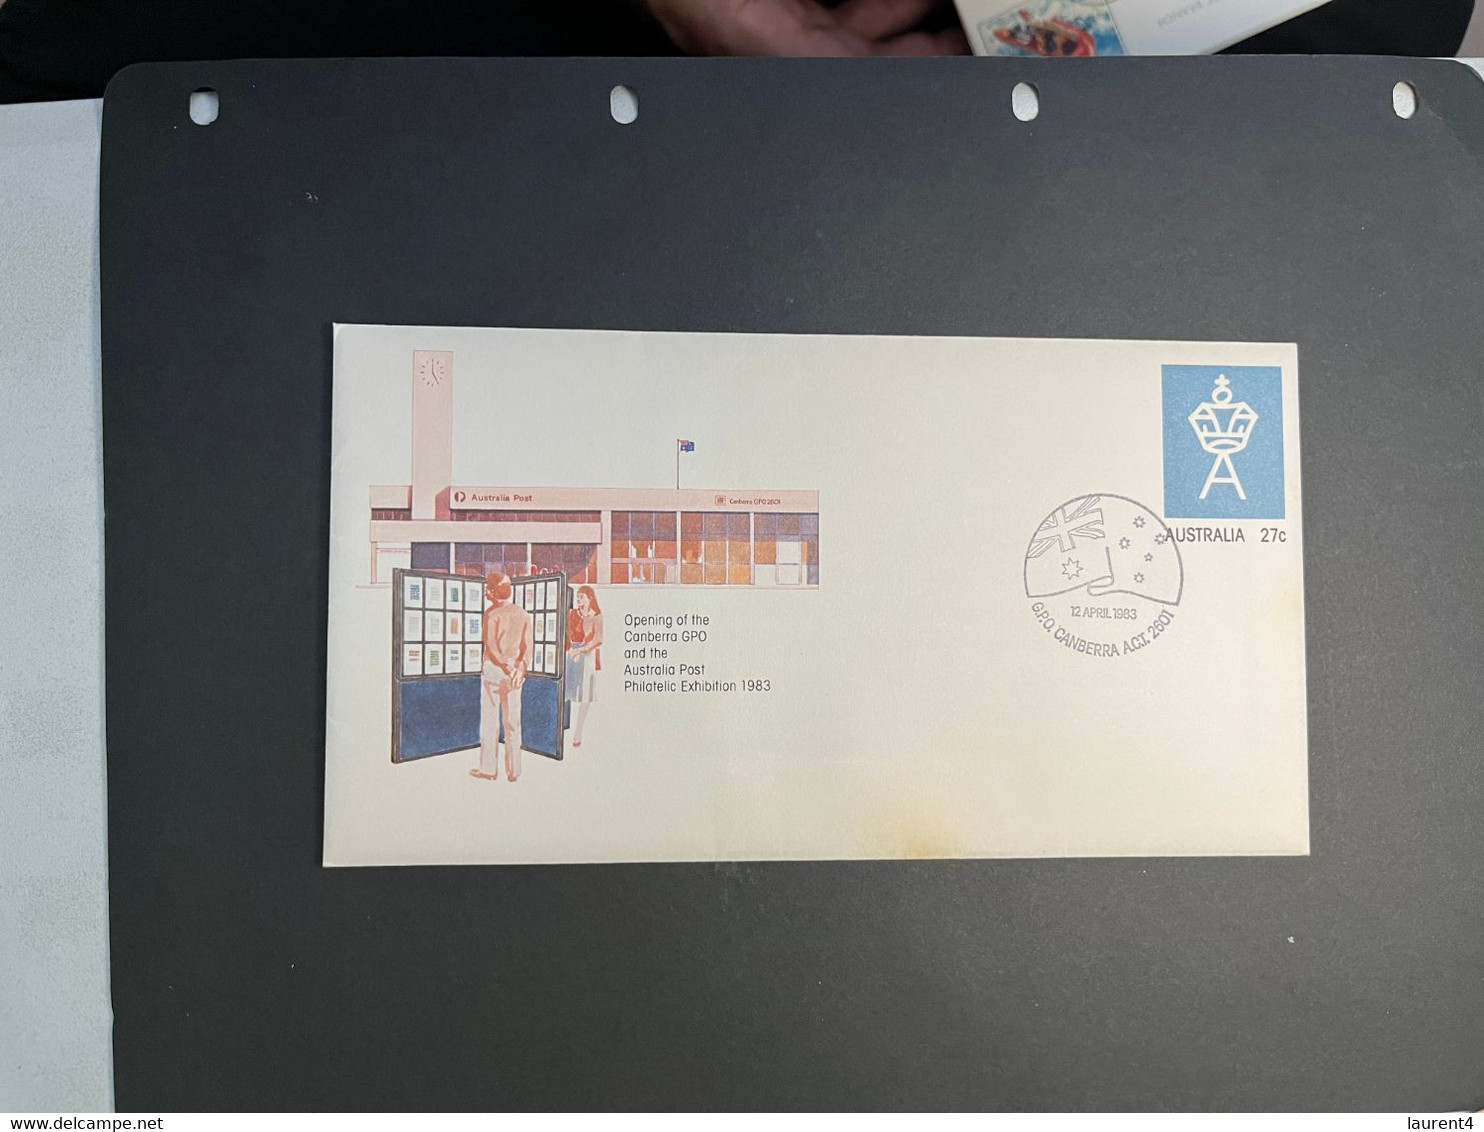 (2 N 24 A) Australia - 1 Cover - 1983 - Canberra GPO Opening (with First Wateramrk Insert) - Poste